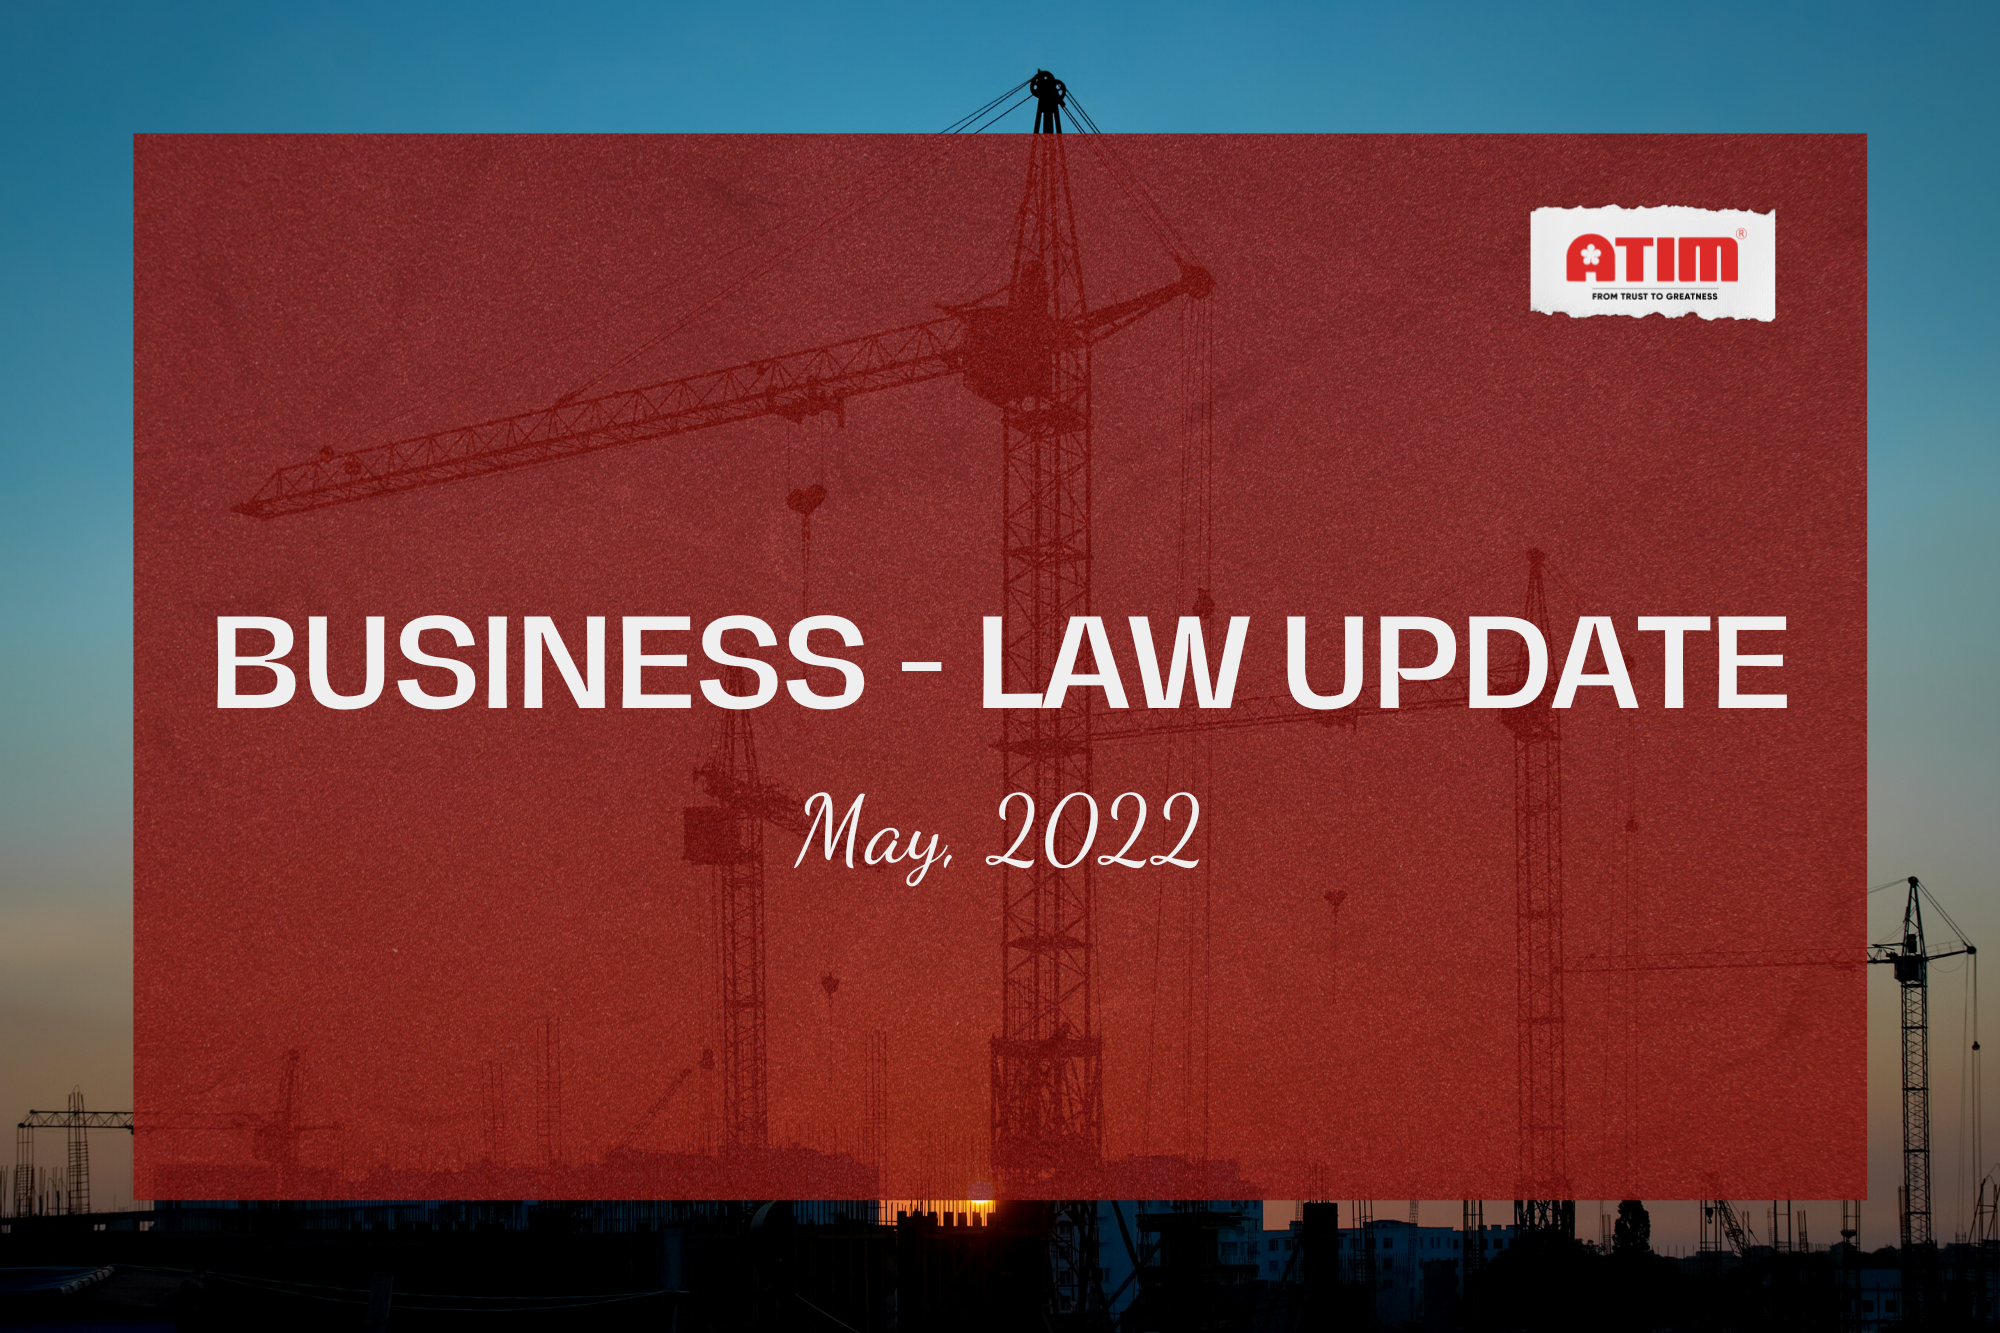 BUSINESS LAW UPDATE - MAY 2022